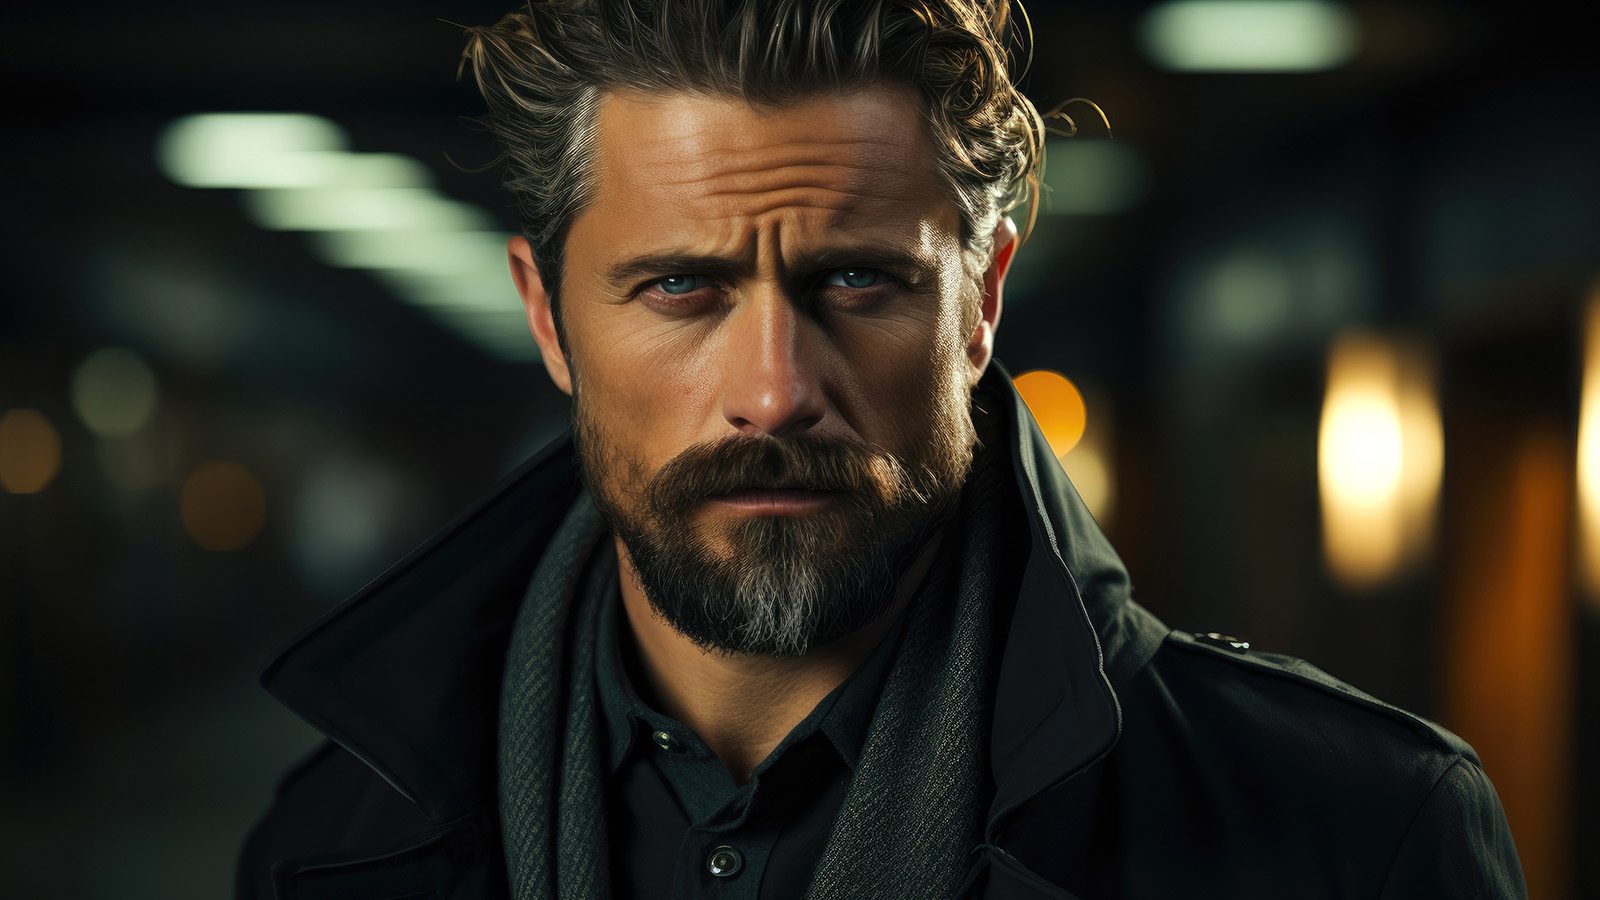 Science Explains Why Men With Beards Are So Attractive